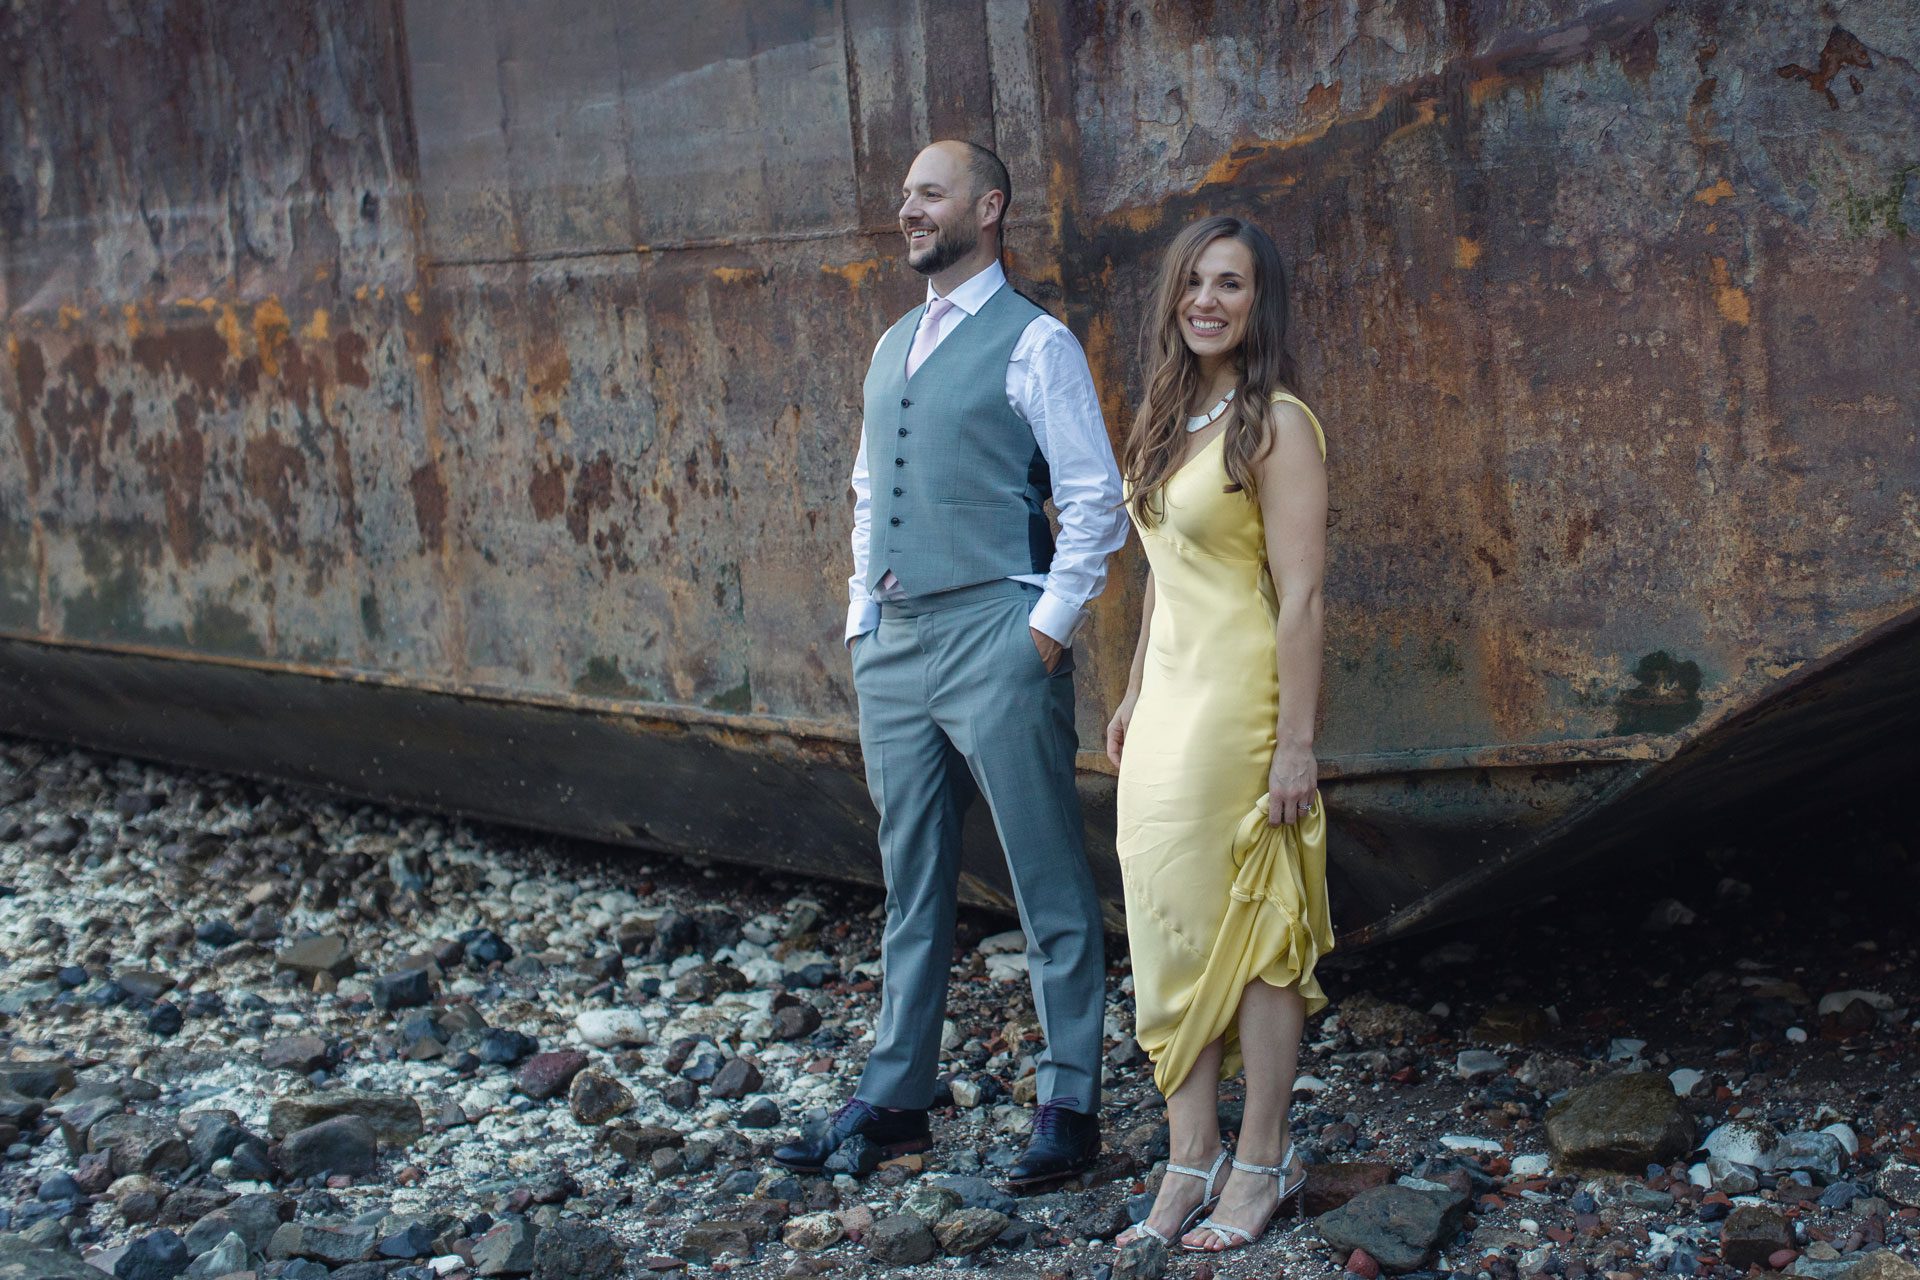 stylish wedding photography down by the river